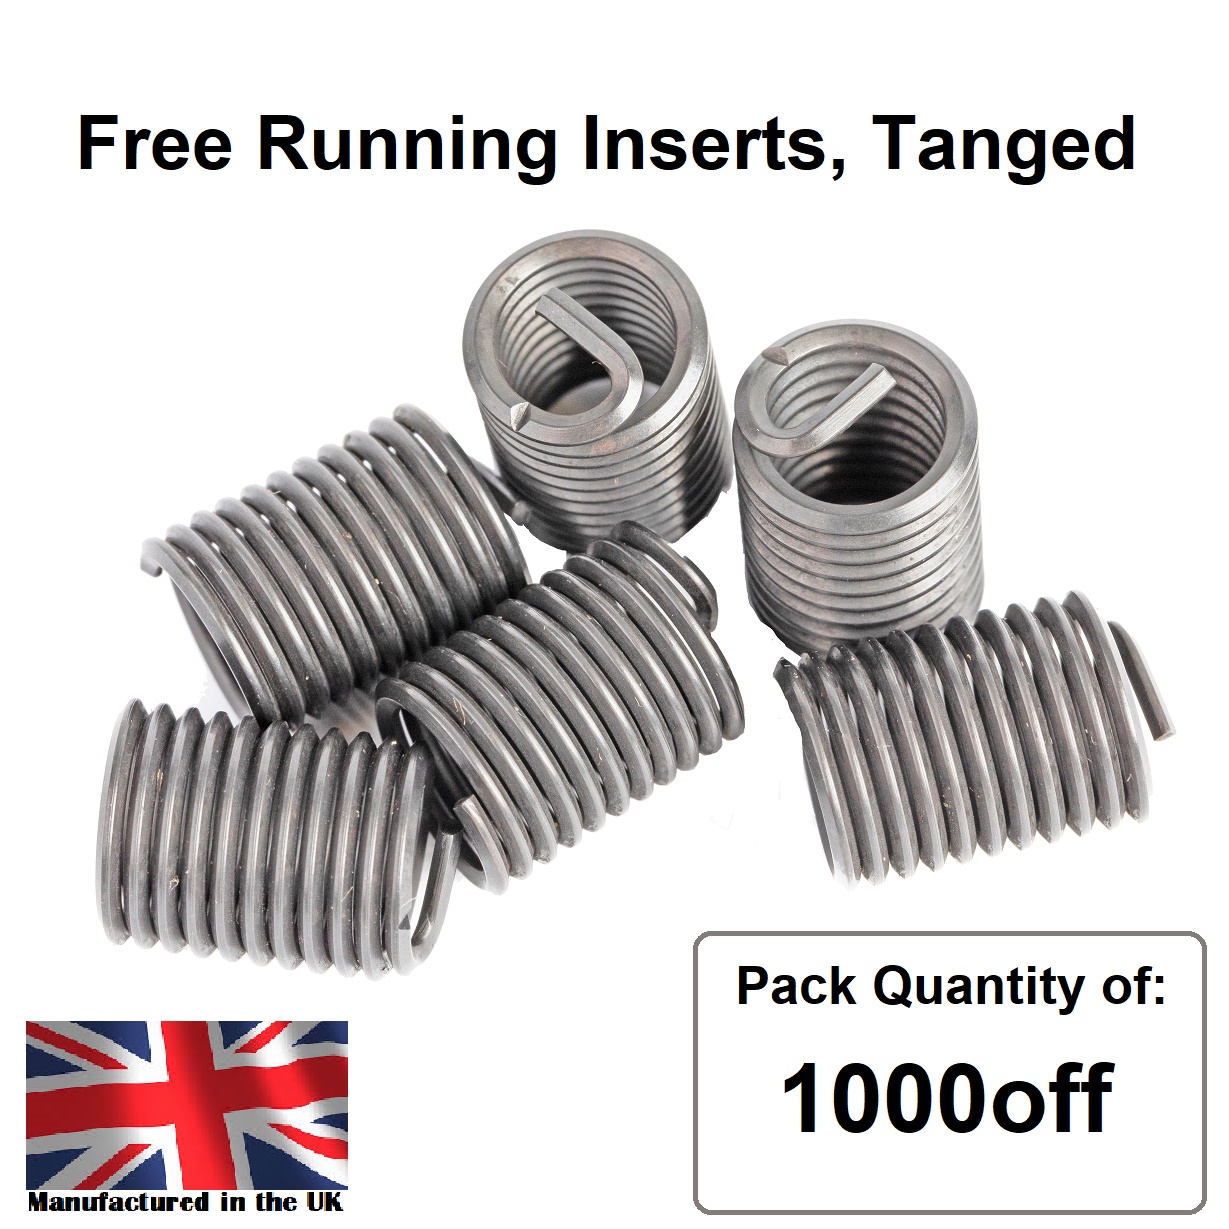 5/16 x 18 x 1D UNC, Free Running, Tanged, Wire Thread Repair Insert, 304/A2 Stainless (Pack 1000)